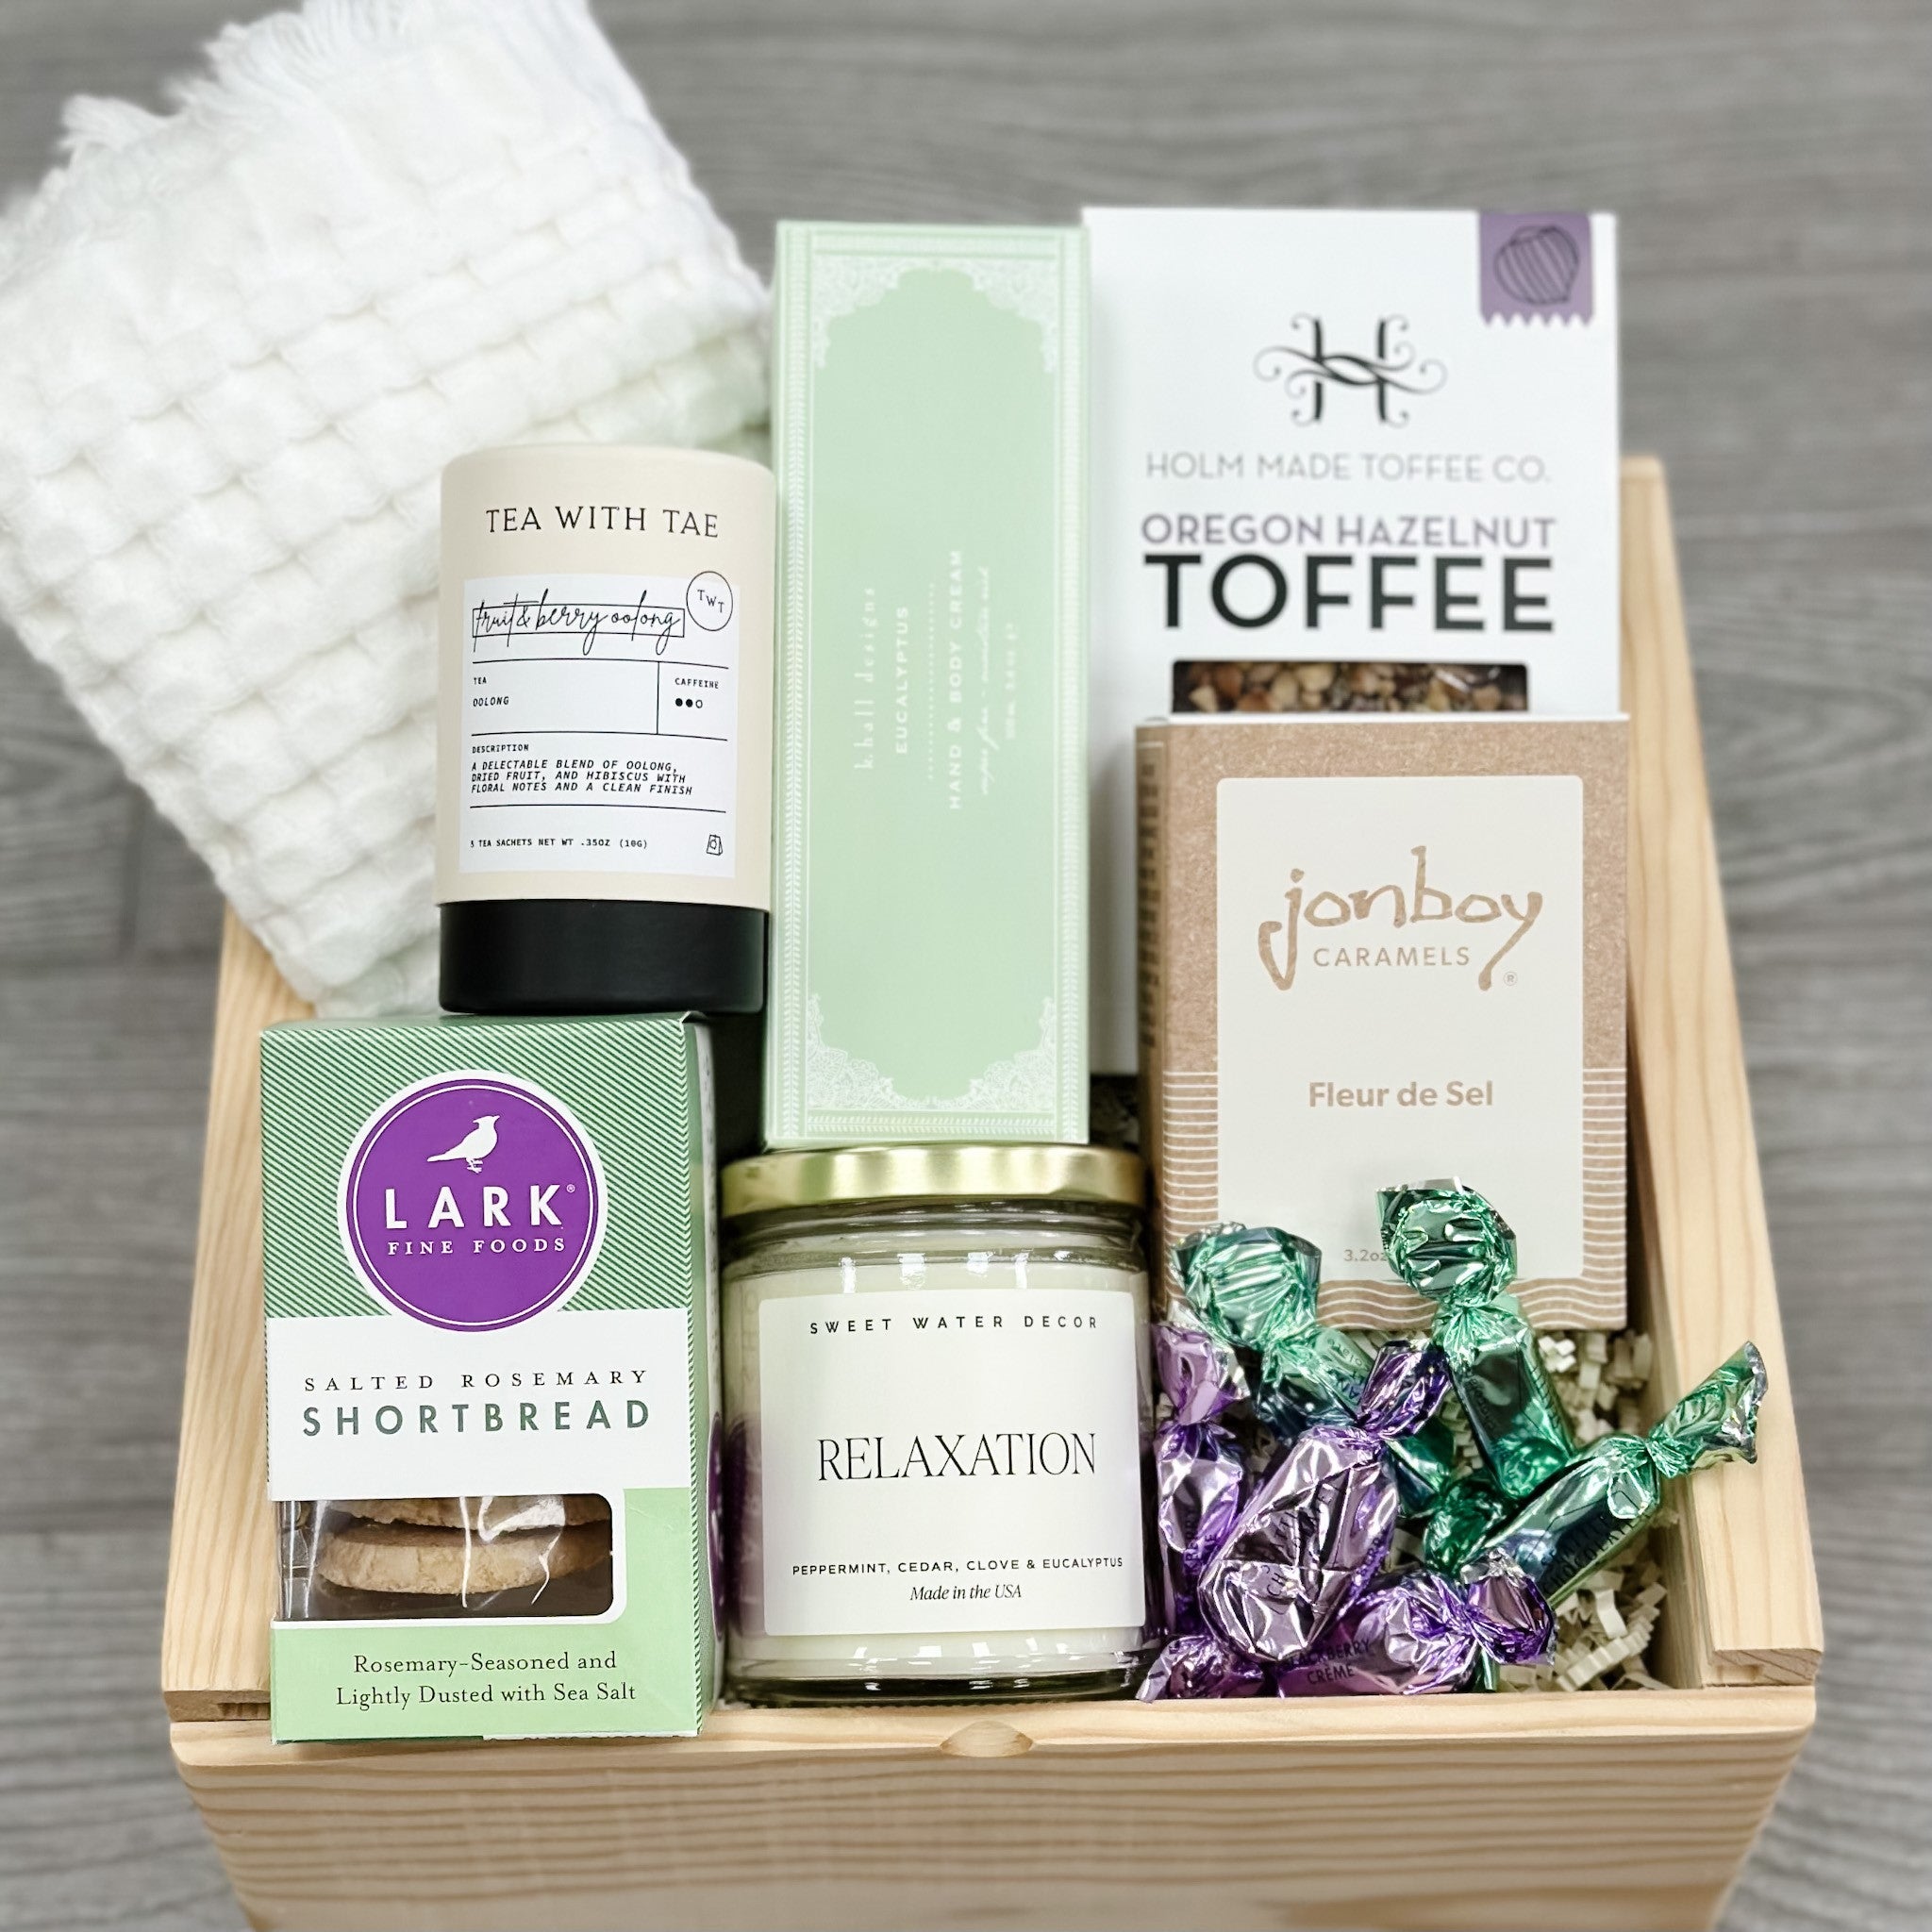 hand towel, tea, cookies, hand cream, toffee, caramel, candle, cookies, chocolate all packaged in our lavender and rosemary gift basket